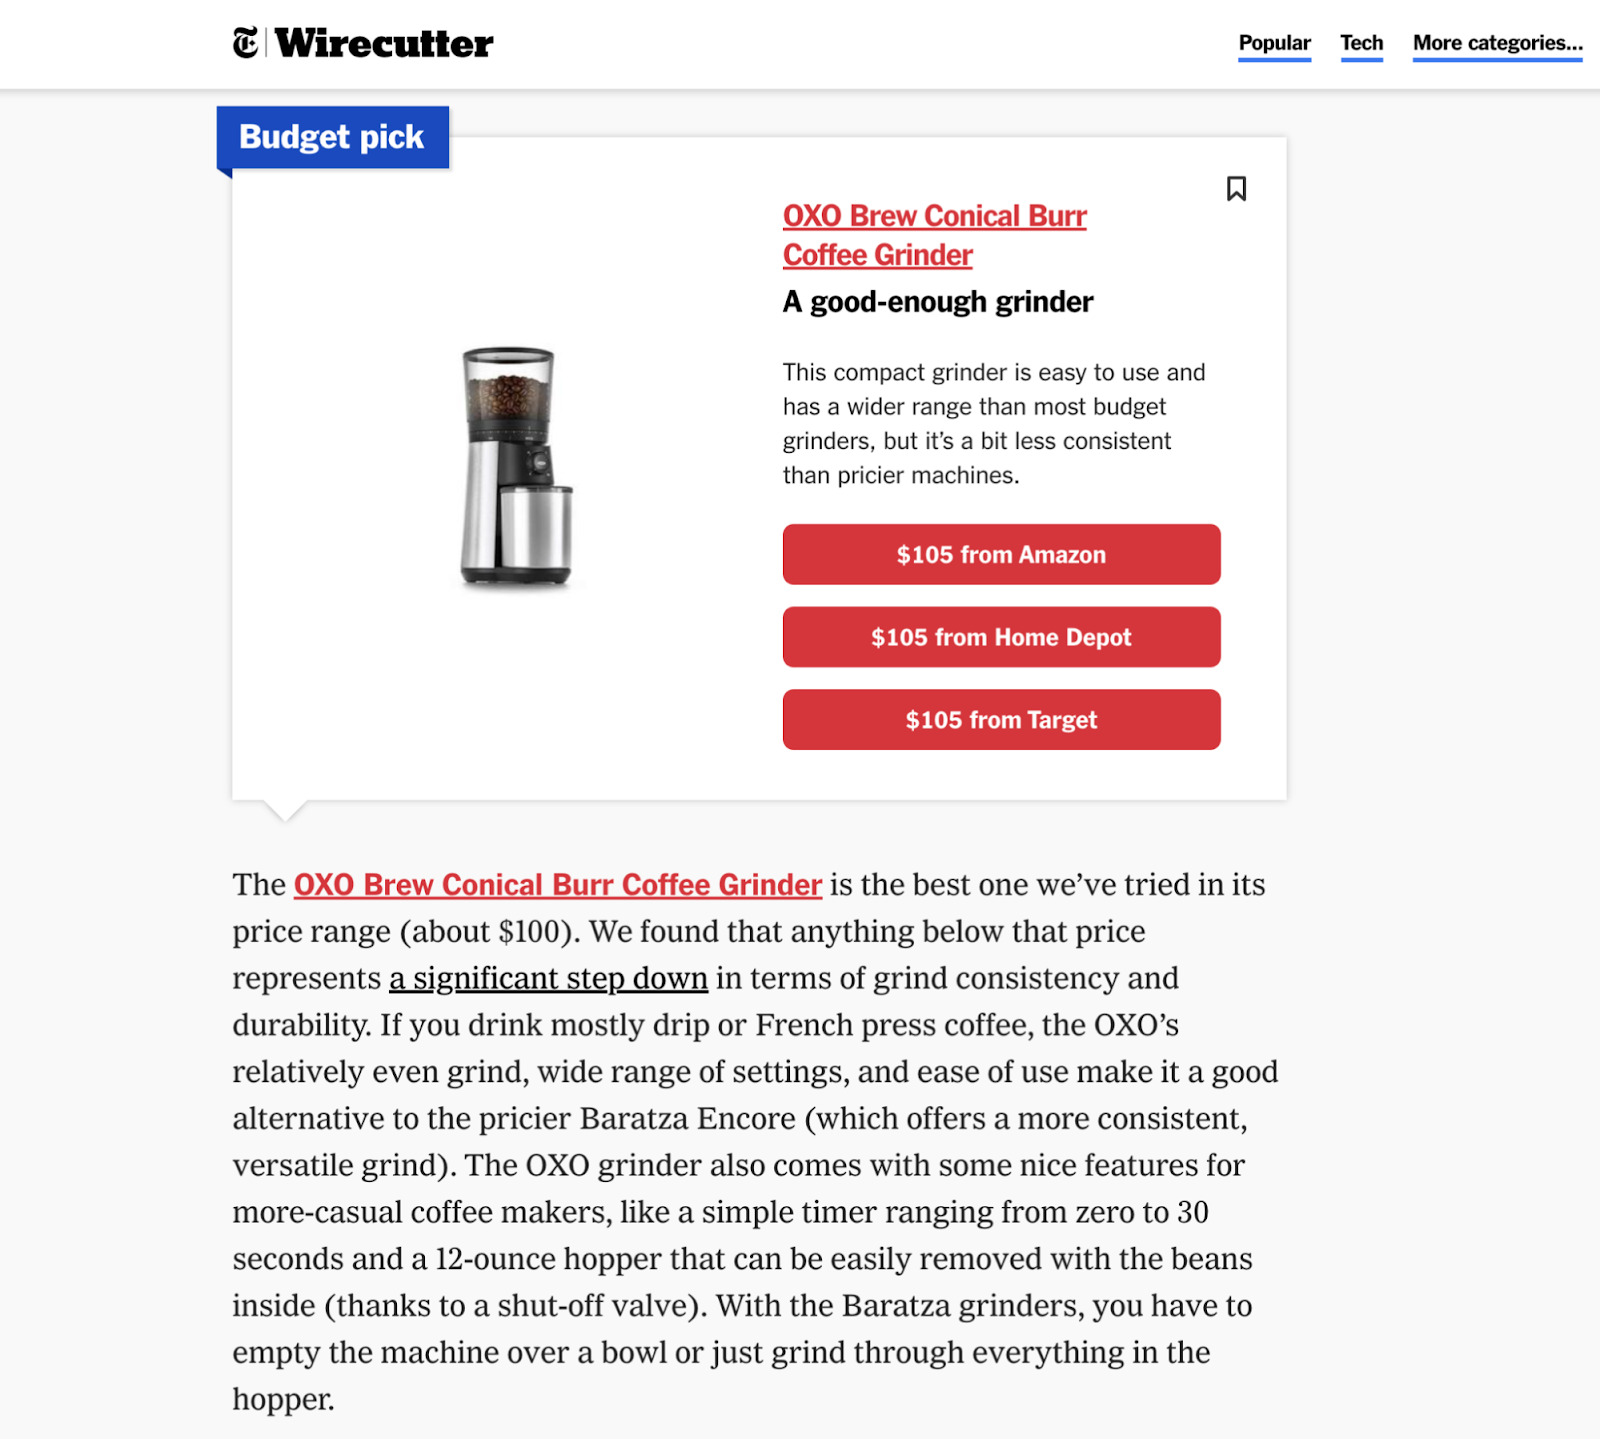 Picture of coffee grinder. Brief write-up next to picture. Below write-up are three links leading to various sites where consumers can purchase the grinder 